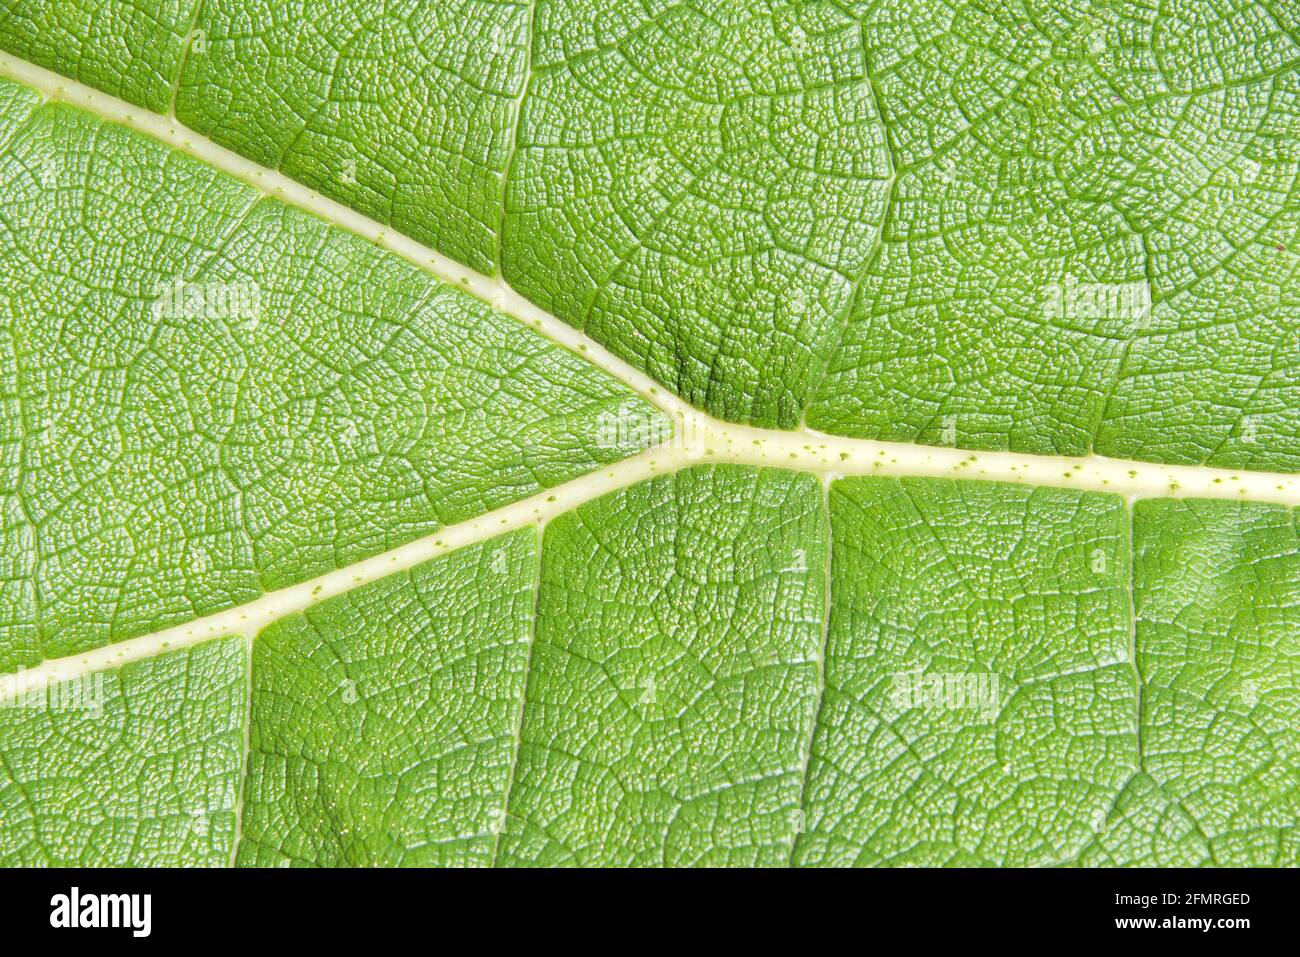 close up detail of a giant Gunnera tinctoria leaf, known as giant rhubarb or Chilean rhubarb, a flowering plant species native to southern Chile and n Stock Photo